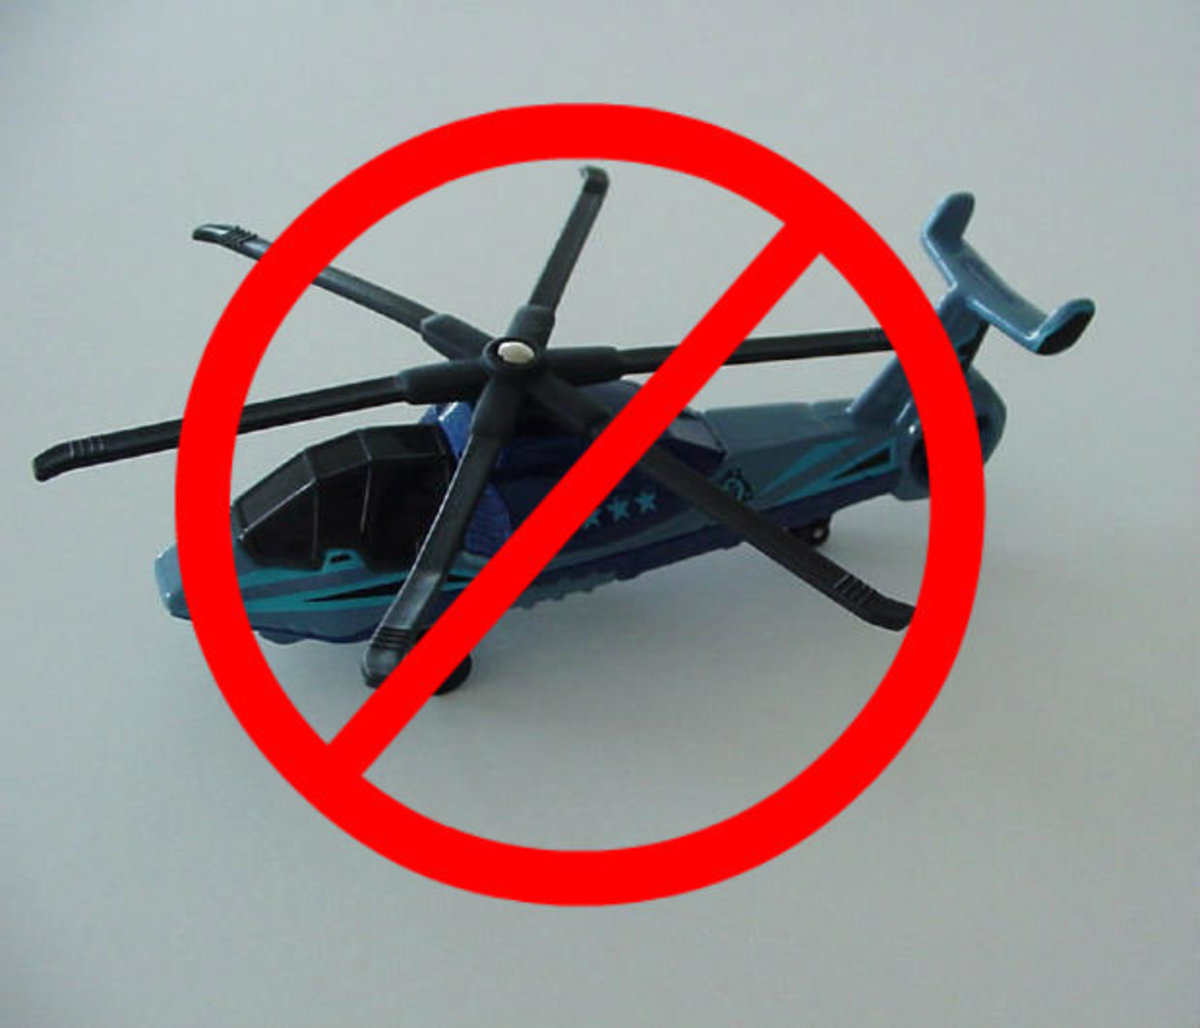 No helicopter parenting...don't hover around the kids when they are having fun.